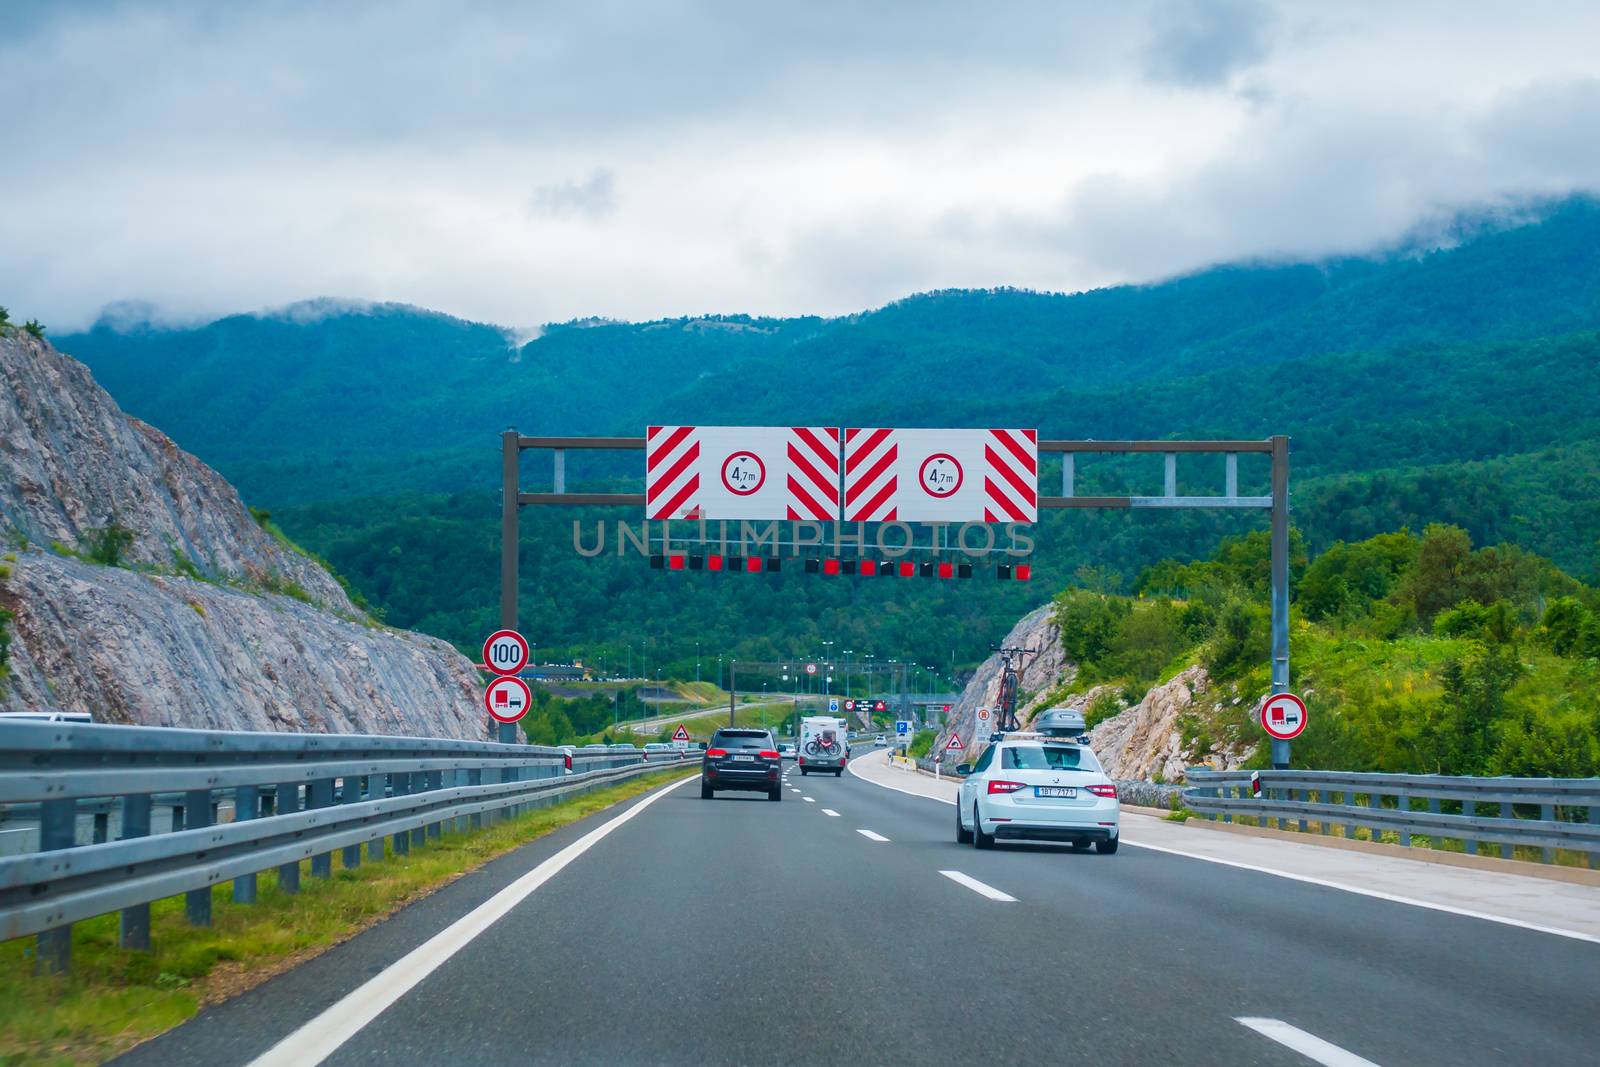 Highway A1, vicinity of Bosiljevo, Croatia, July 1 2018: A1 Highway in Croatia from Zagreb to Split and Adriatic sea is one of the busiest highways during holiday season